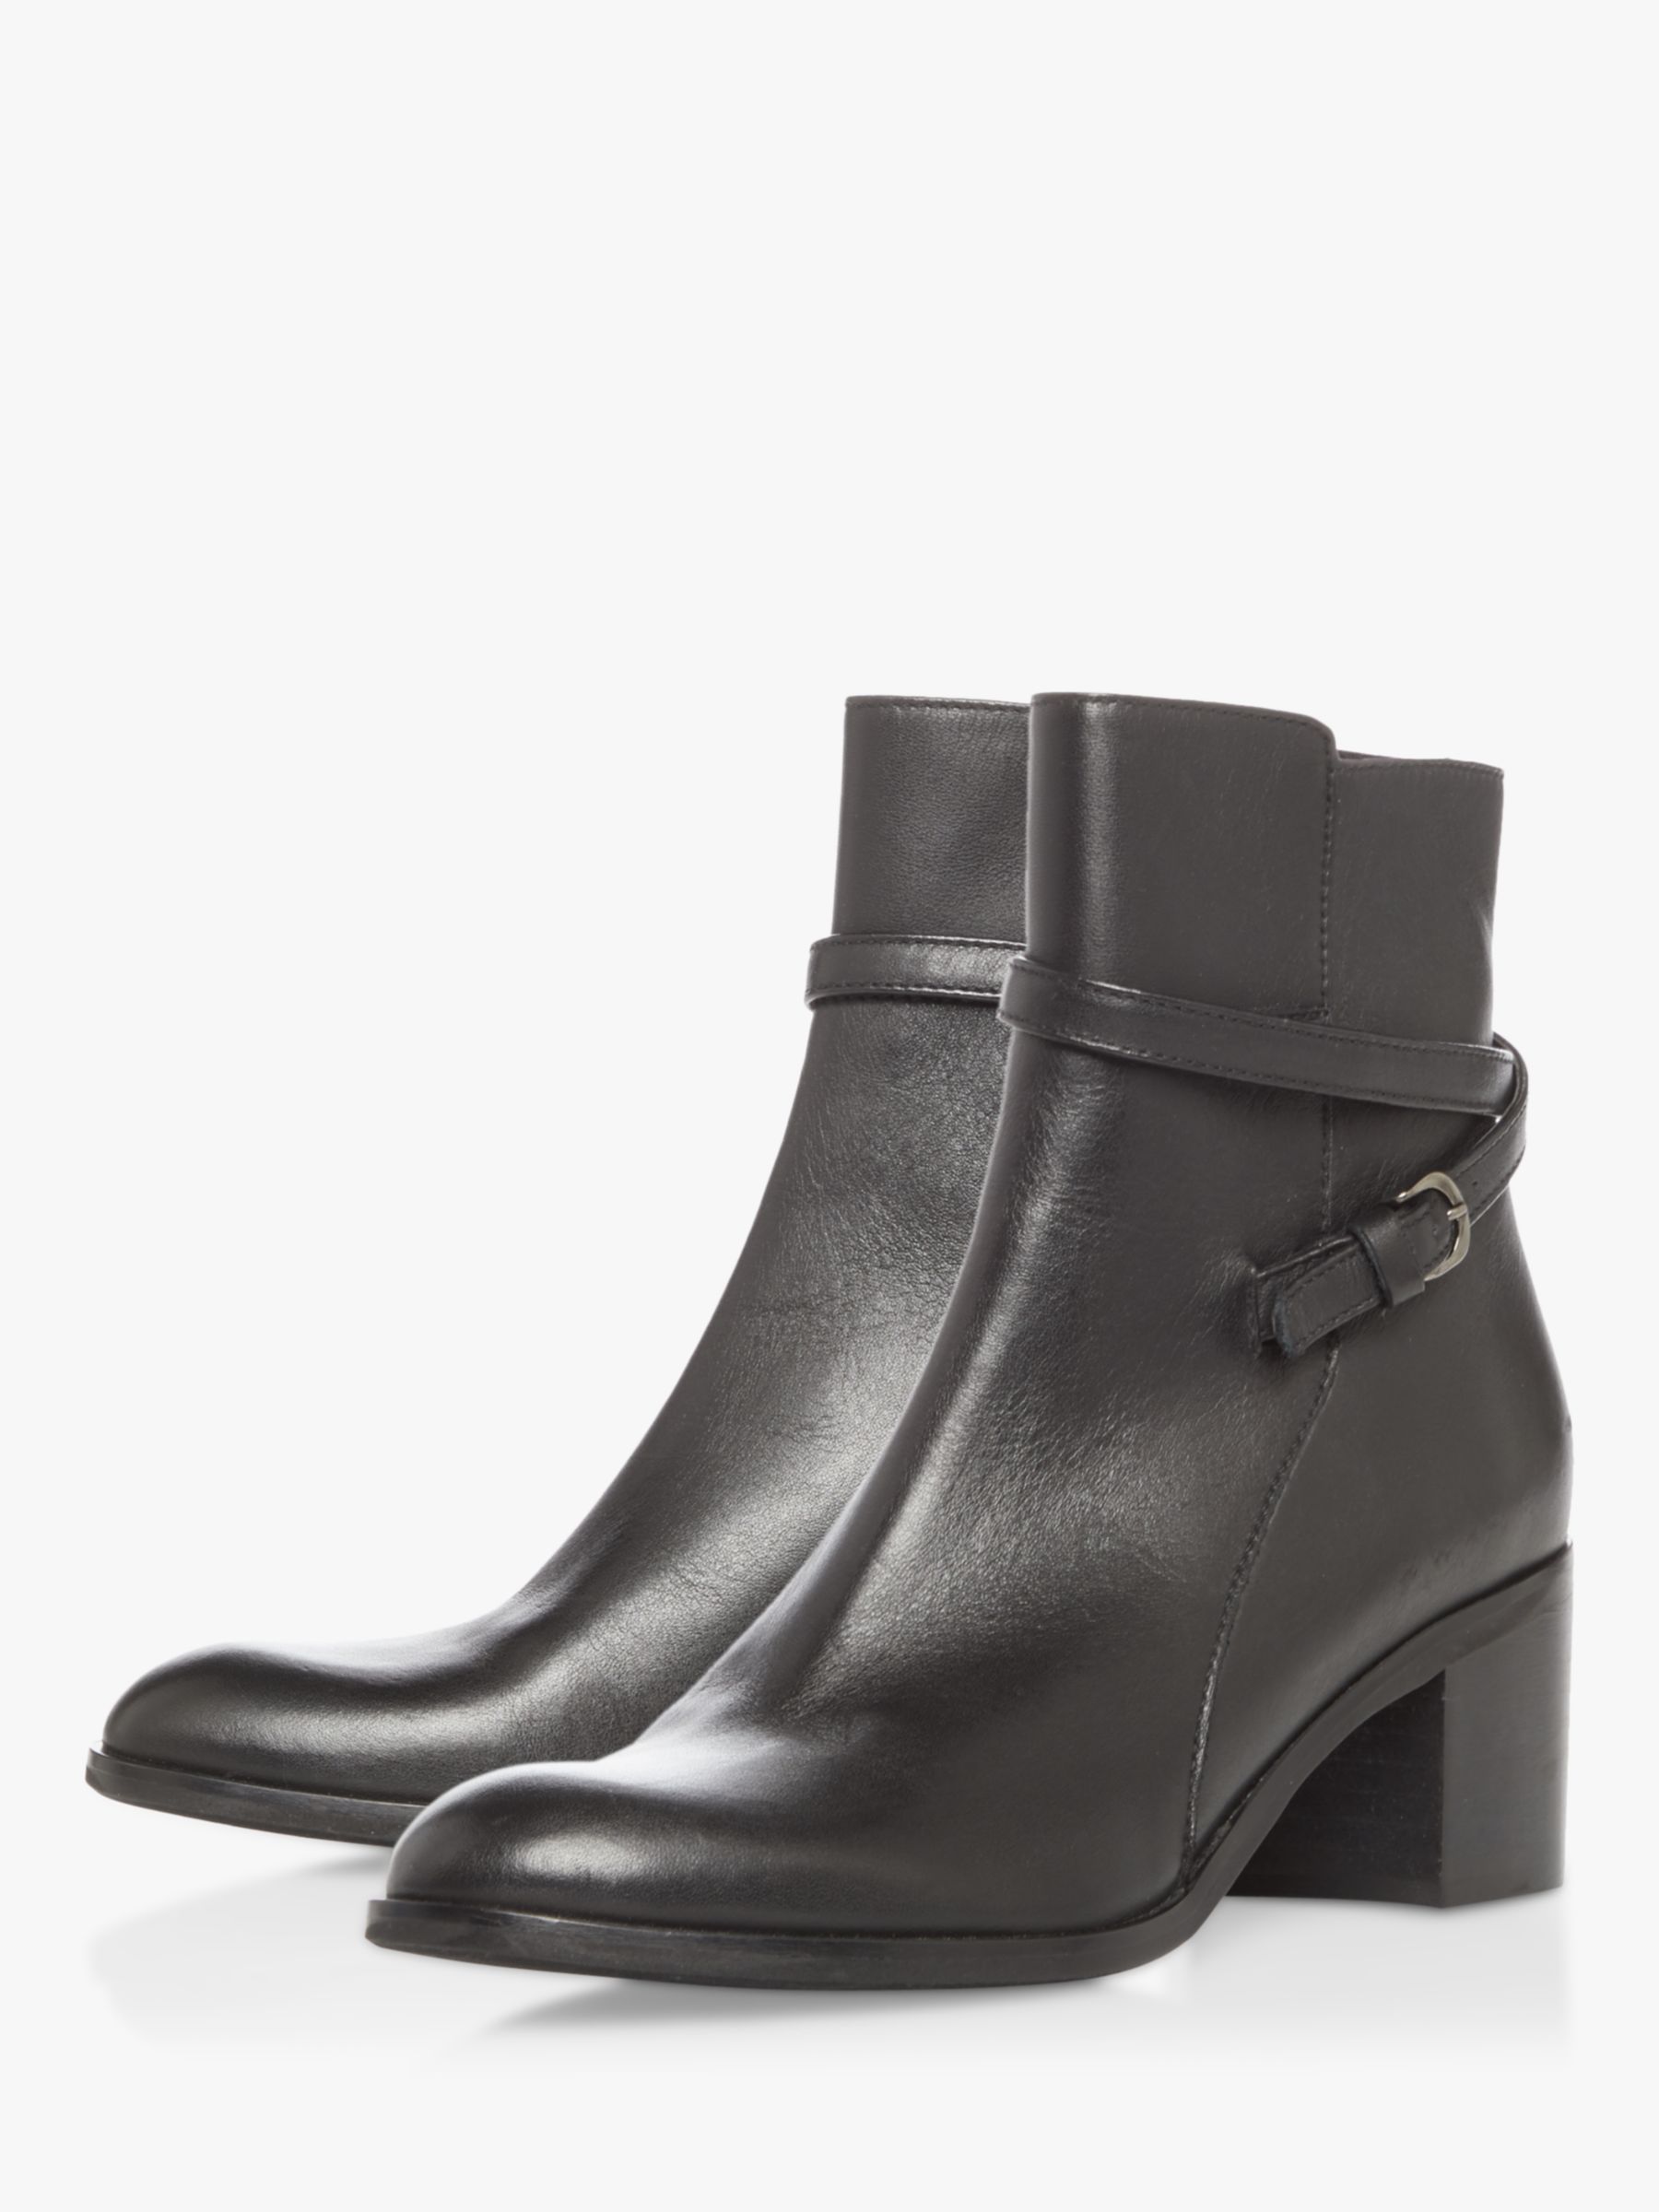 Dune Patti Leather Refined Buckle Detail Zip Ankle Boots, Black